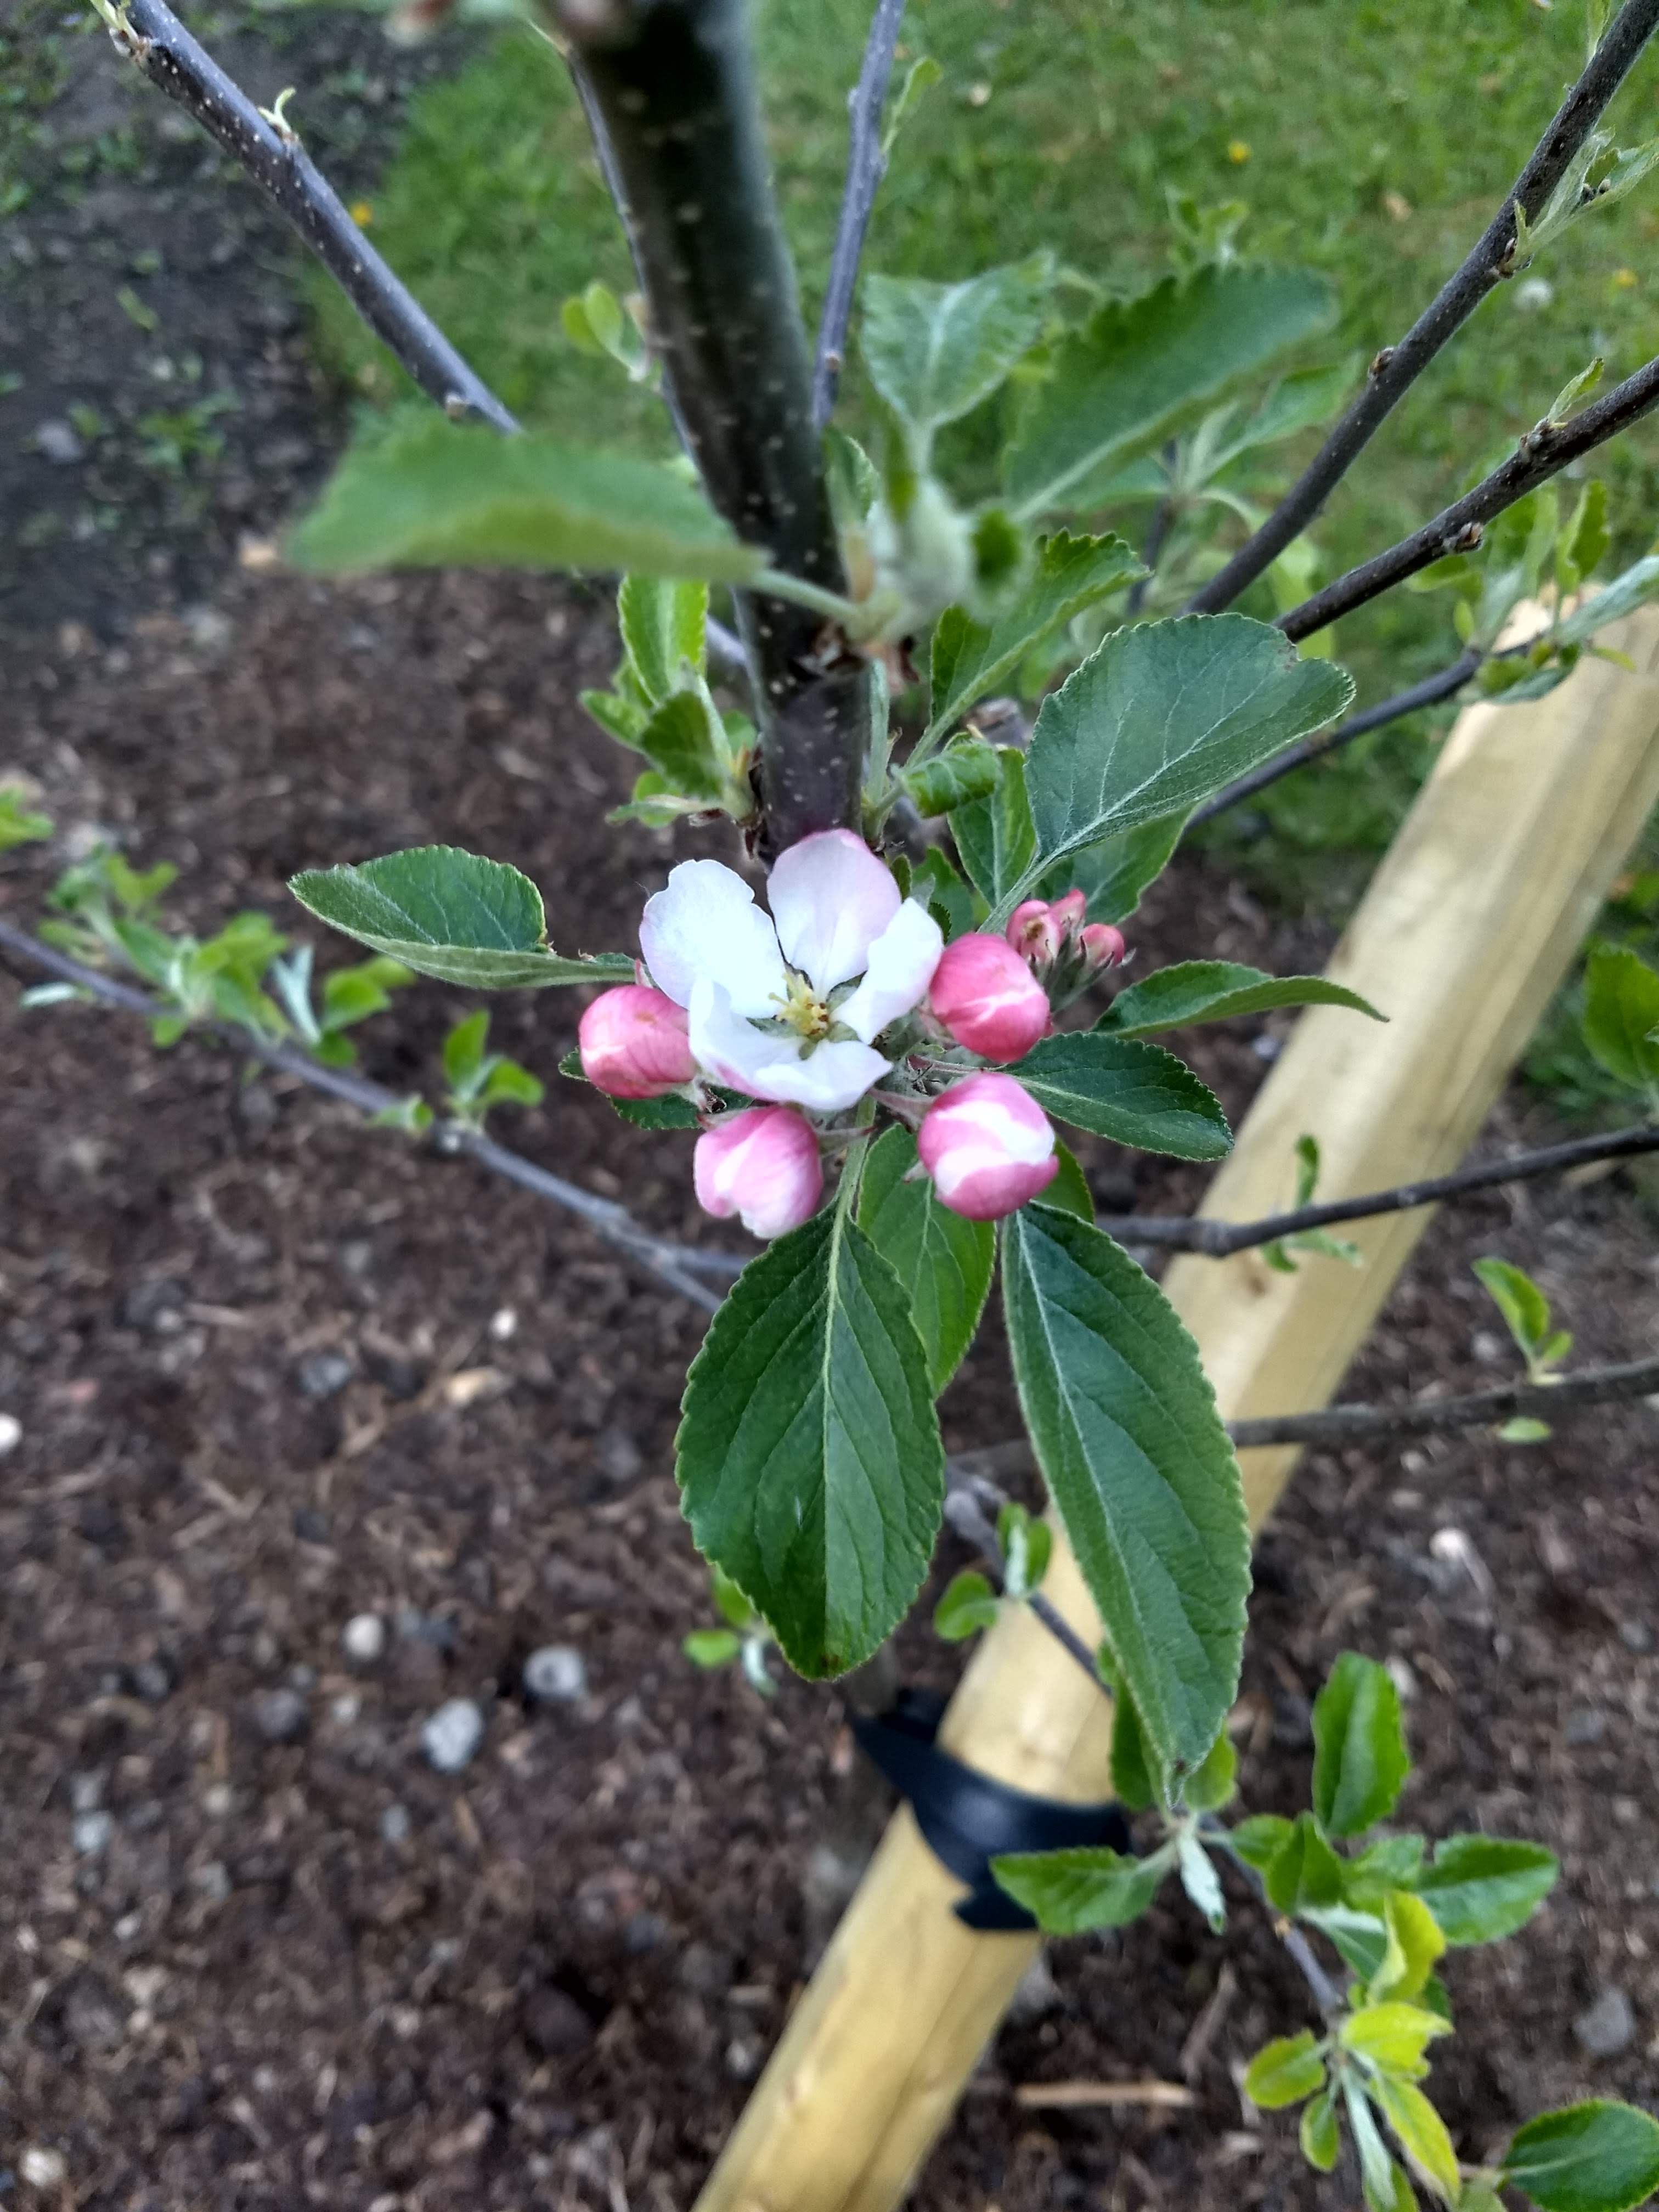 A flower on a young apple tree